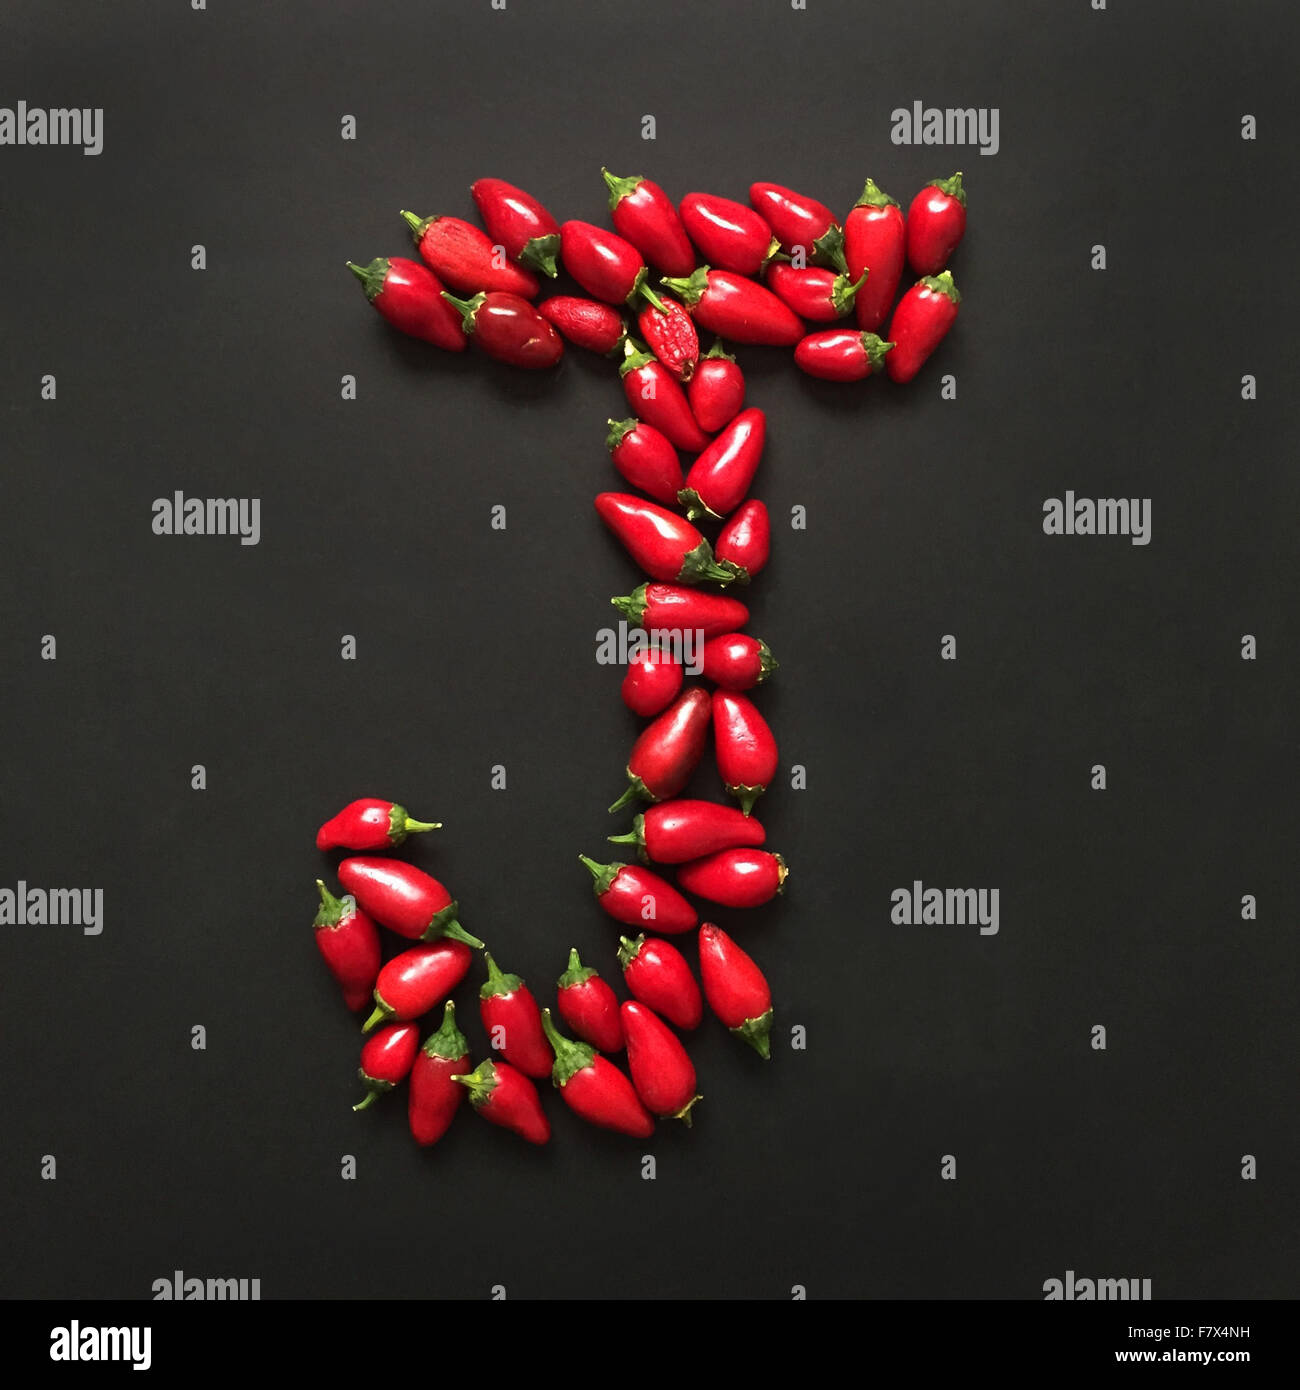 Letter J made from jalapeno peppers Stock Photo